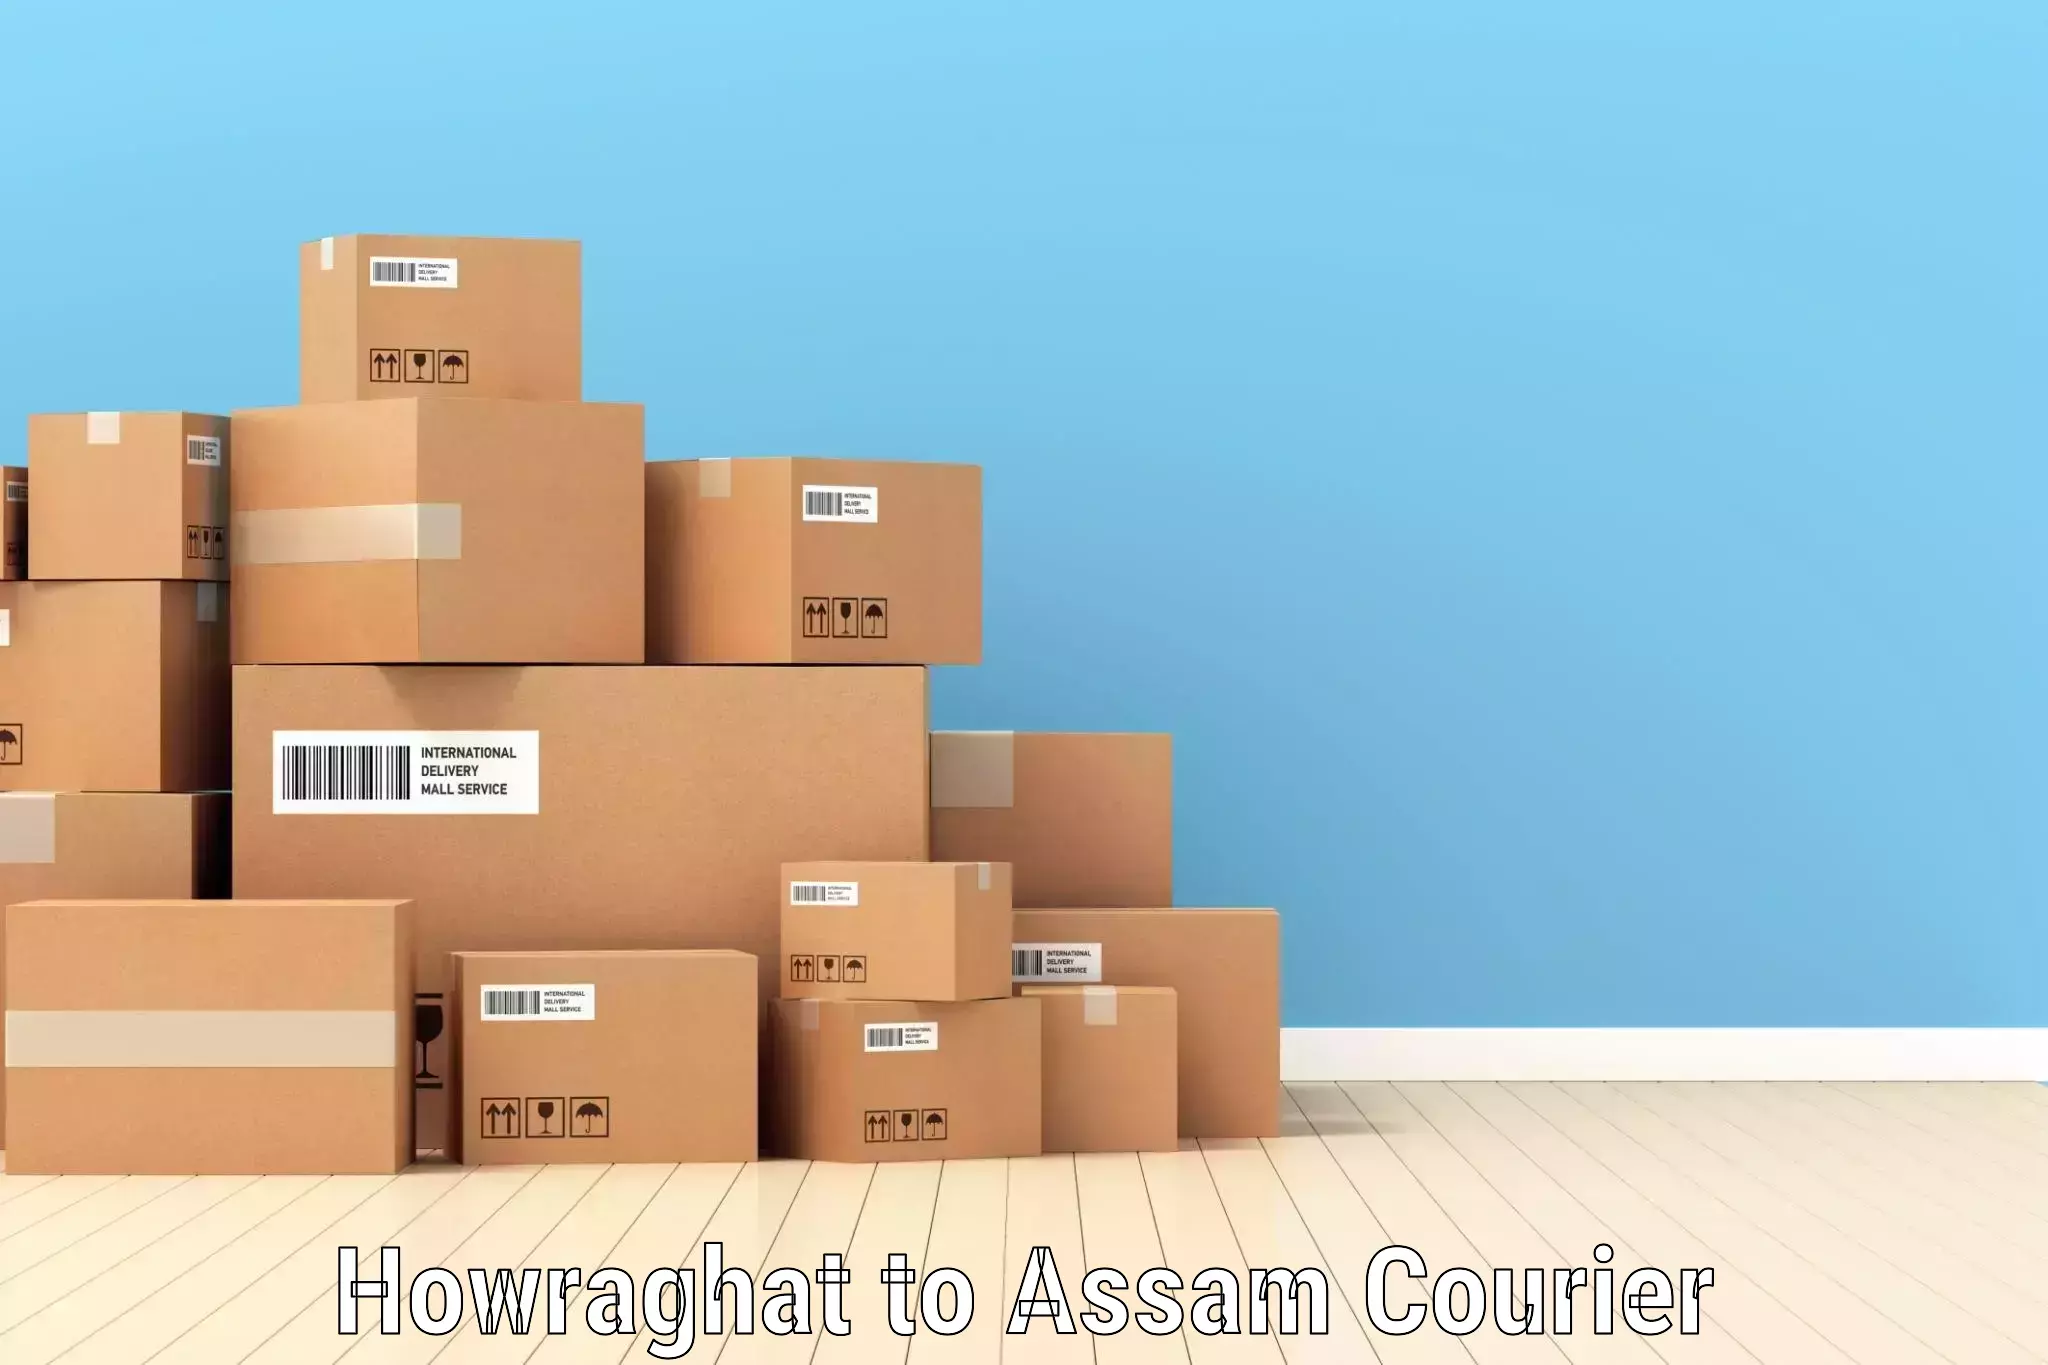 Affordable parcel rates in Howraghat to Assam